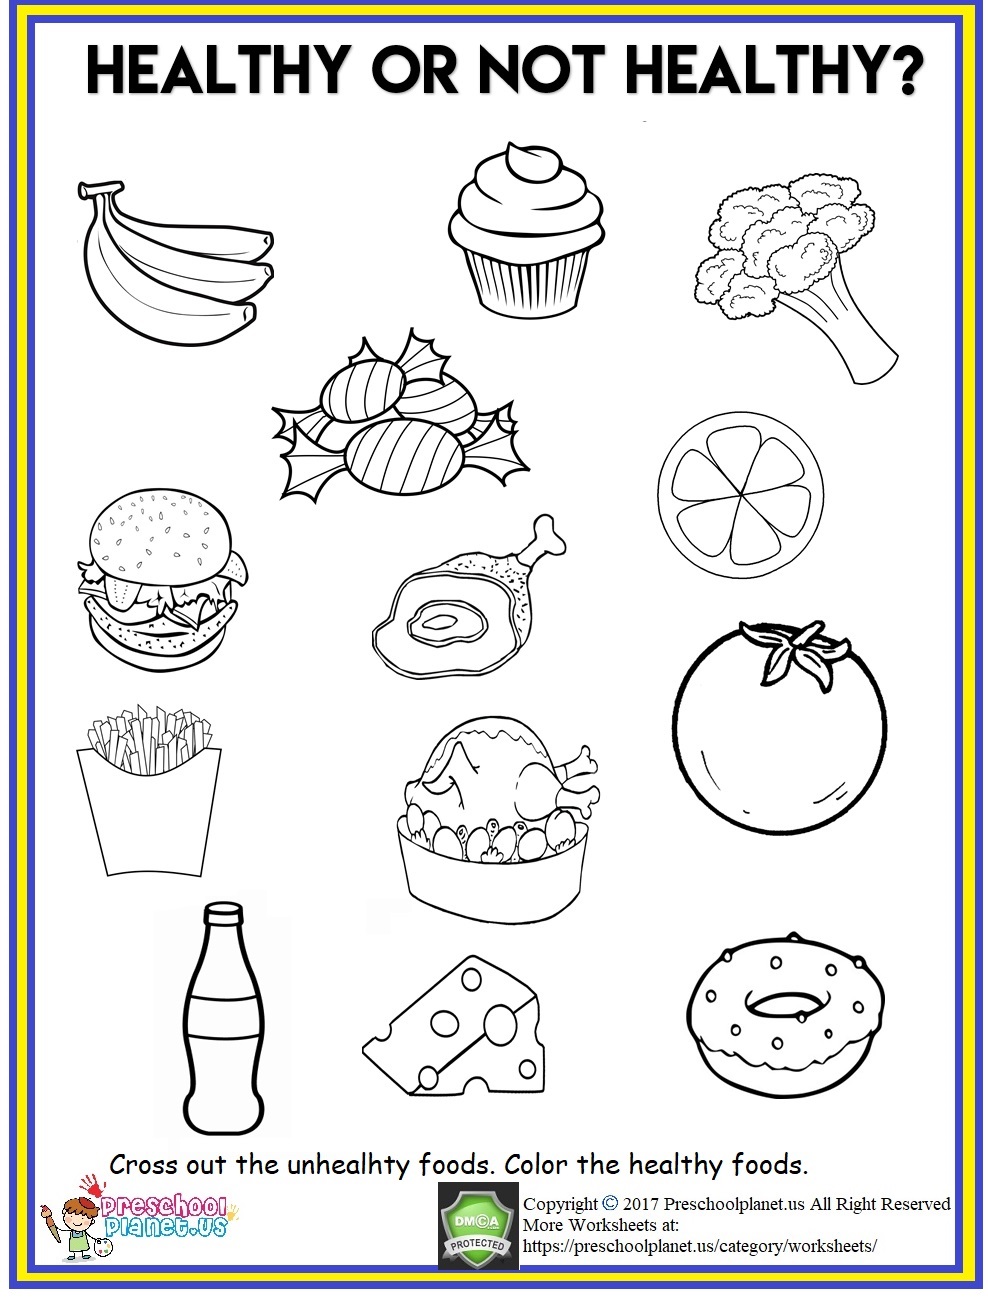 Worksheets Of Health Diet For Grade 3 Empowered By Them June 2012